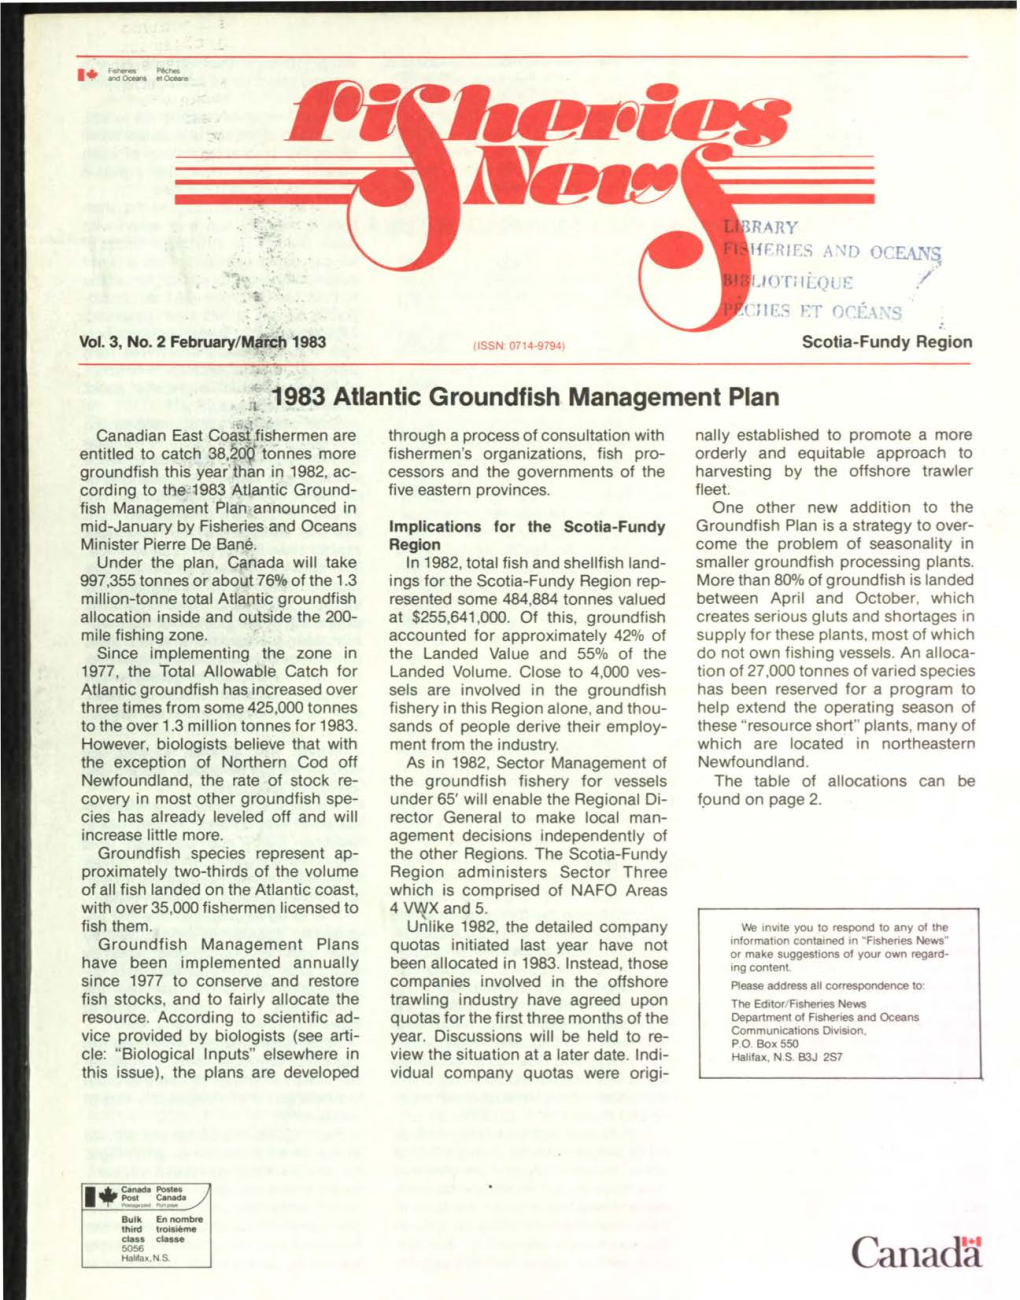 Fisheries News February March 1983